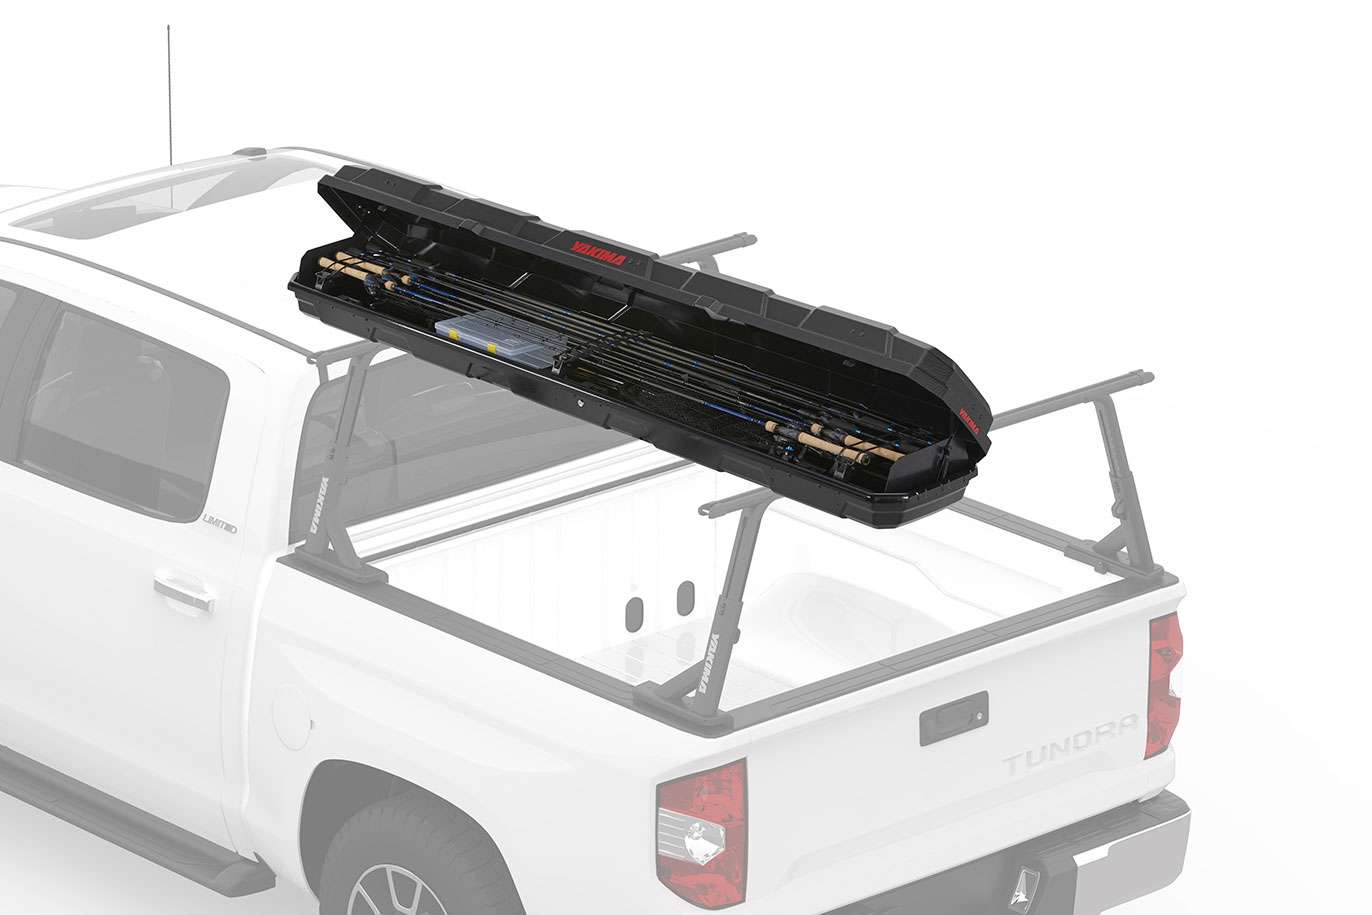    <B>Yakima TopWater</B>
<BR>The super-versatile TopWater is easily mounted to a roof rack or trailer for on-the-go access to as many as eight fully rigged baitcasting and spinning rods up to 8 feet in length (or 20 bare rods). The TopWater keeps rods and reels secure and organized during transit thanks to protective foam pads and rubber straps that ensure everything stays in place. Additional space under the rods accommodates low-profile tackle boxes and other gear. The durable hard-plastic shell features Carbonite, the industry-proven, American-made material used in Yakimaâs SkyBox products. With a Yakima SKS lock included, the TopWater is equipped to keep cargo secure. As with the DoubleHaul, the TopWater is compatible with any crossbar style and shape. 
<BR>
<B>MSRP: $549</B> 
